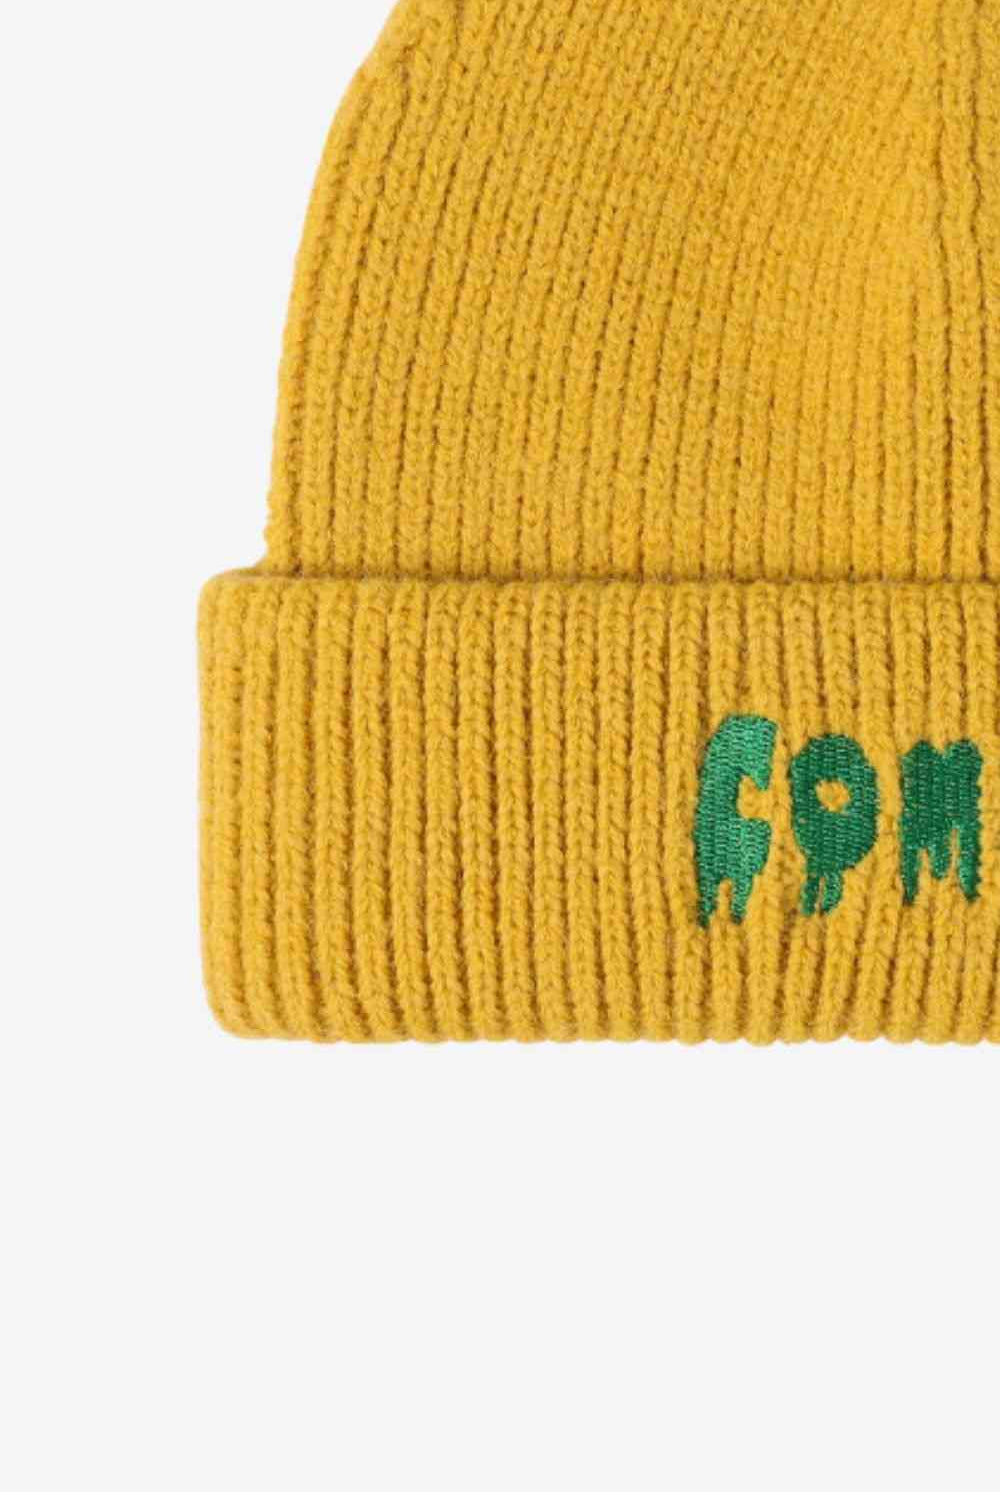 Goldenrod COME ON Embroidered Cuff Knit Beanie Winter Accessories